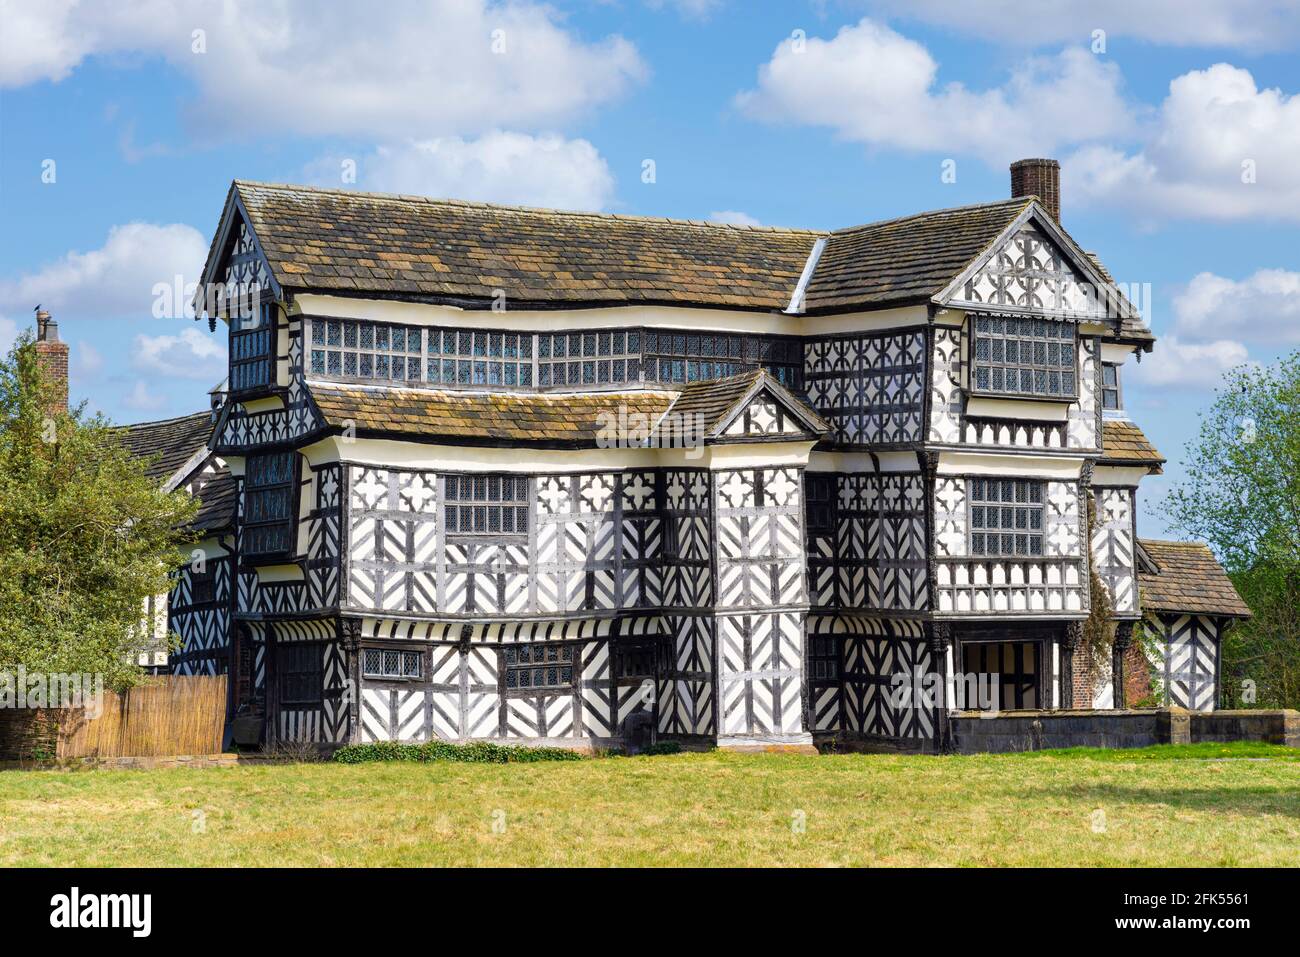 Little Moreton Hall a grade1 listed building black and white half timbered Tudor manor house with a moat near Congleton Cheshire England GB UK Europe Stock Photo